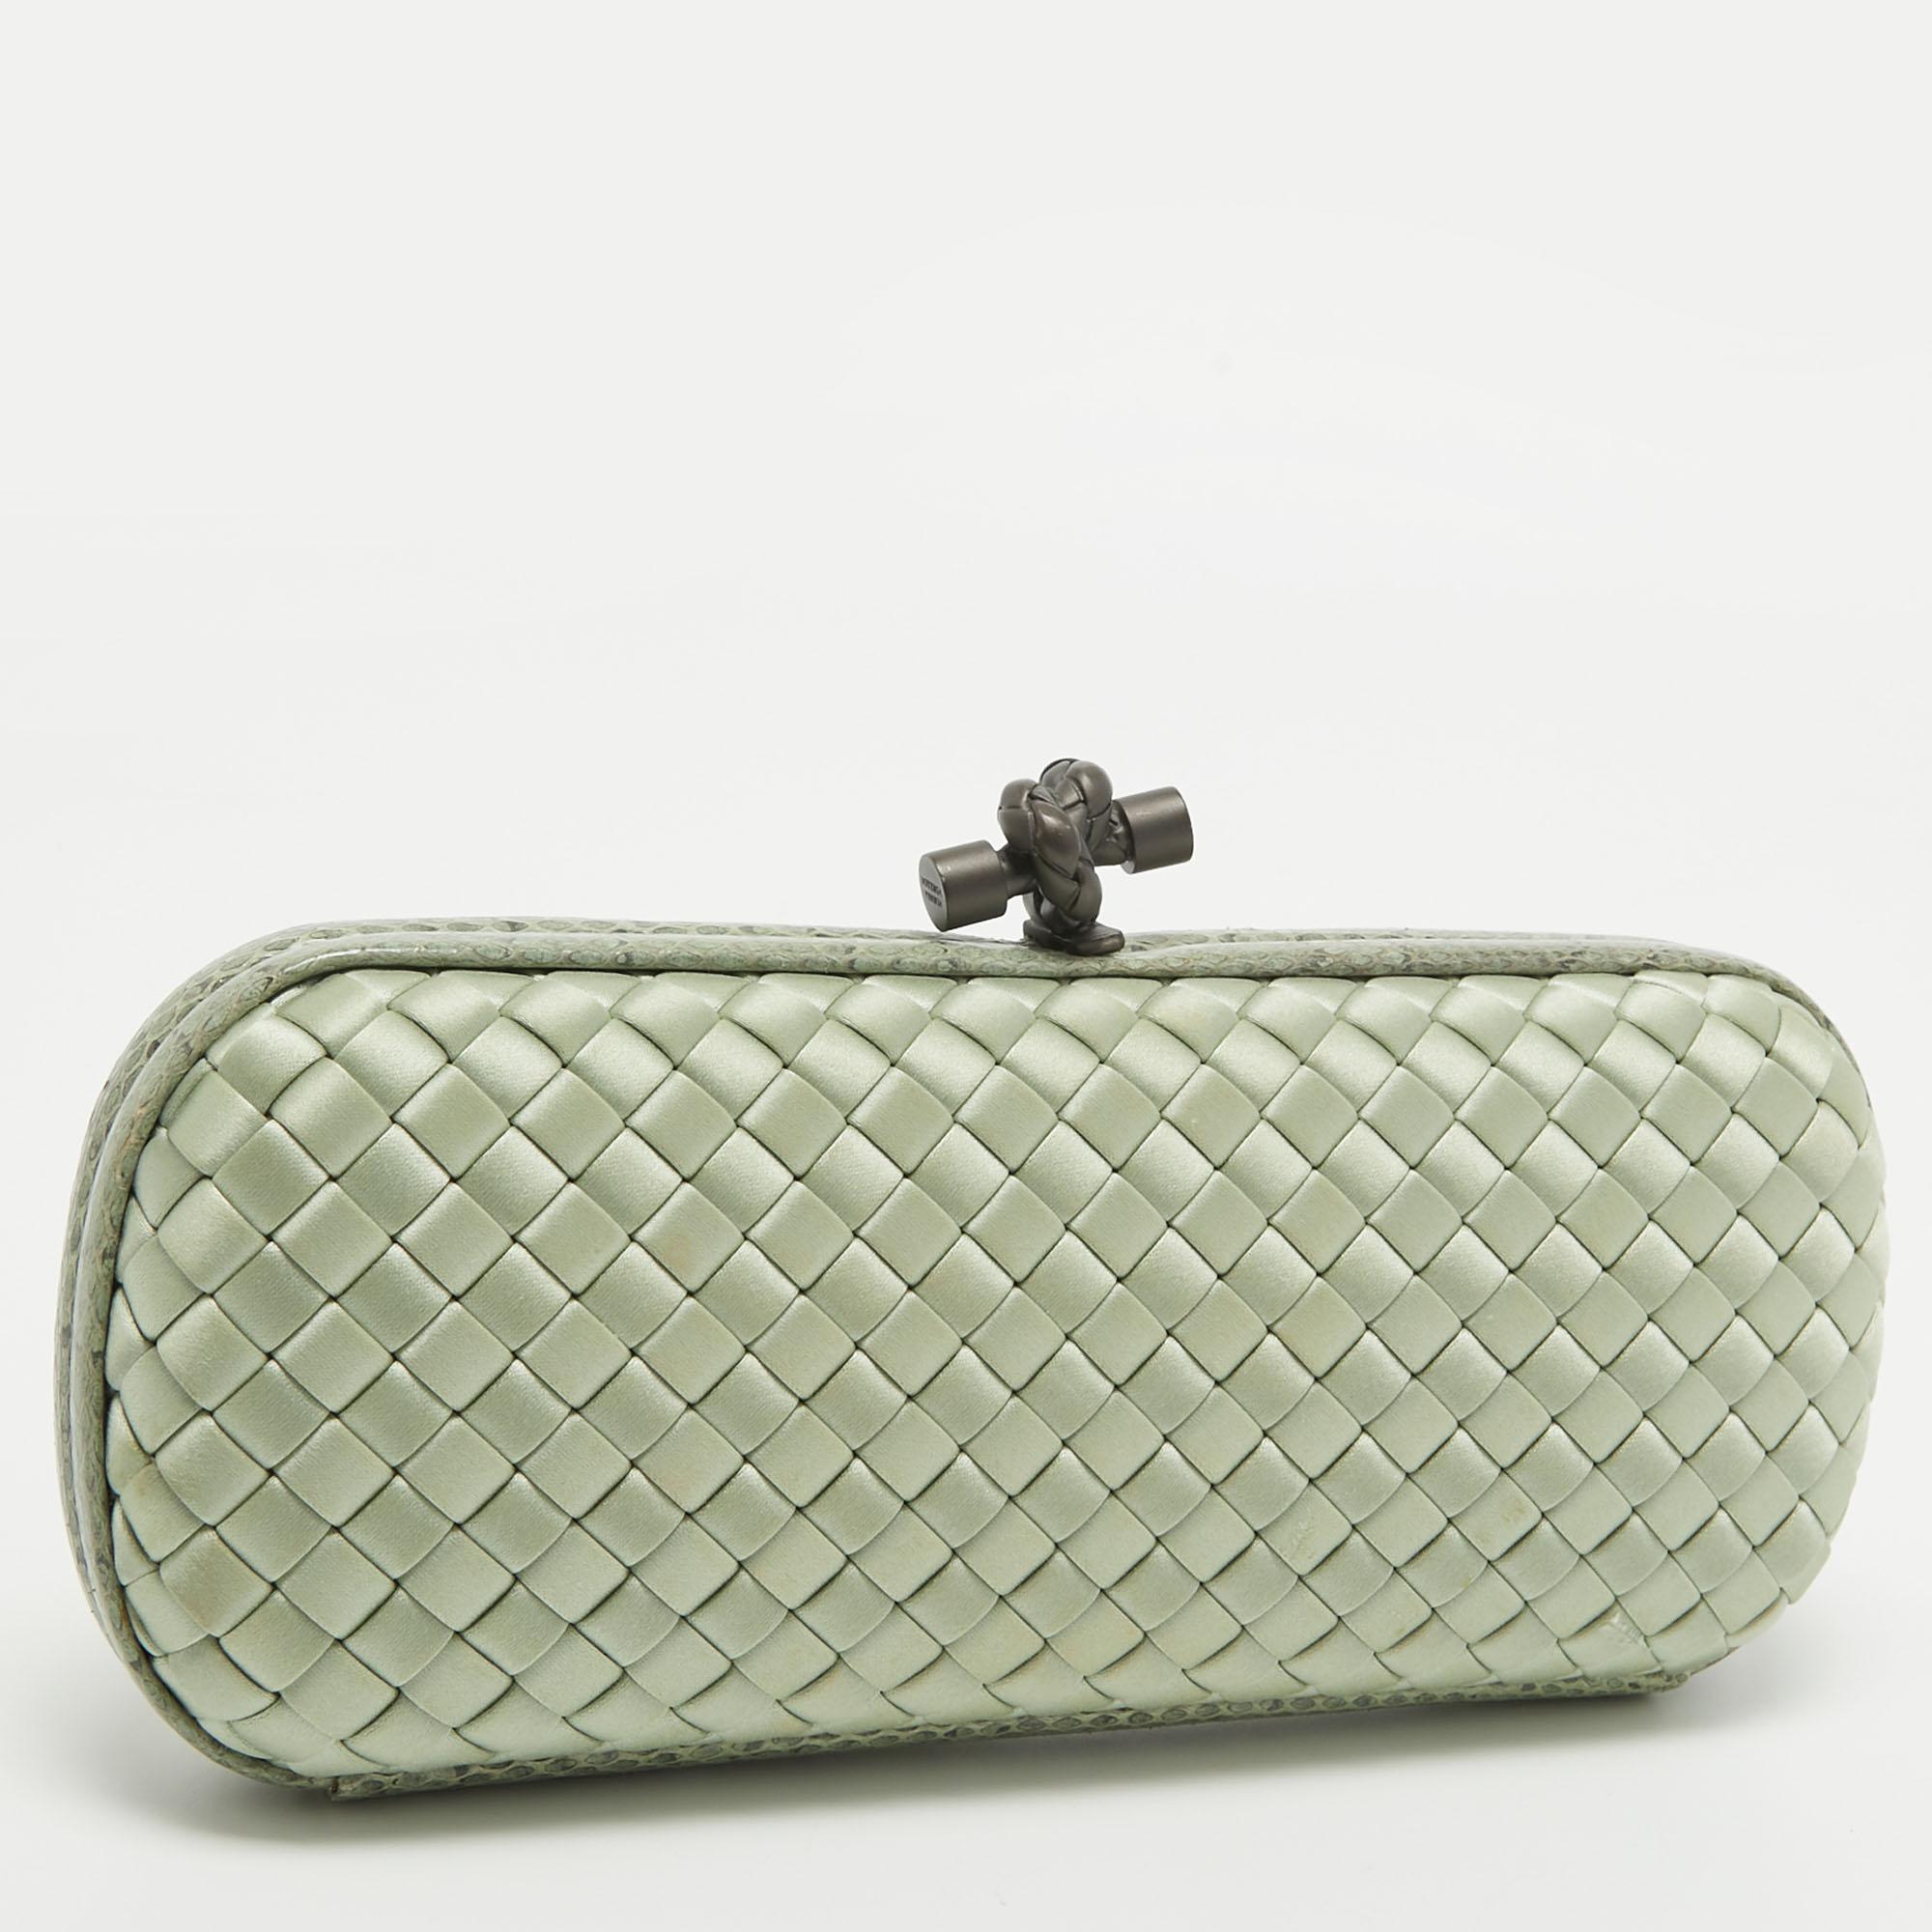 It is so easy to fall in love with this clutch from Bottega Veneta. Light green in shade and stunning in appeal, this creation will be a fantastic addition to your closet. Meticulously crafted from satin and water snake leather in their Intrecciato